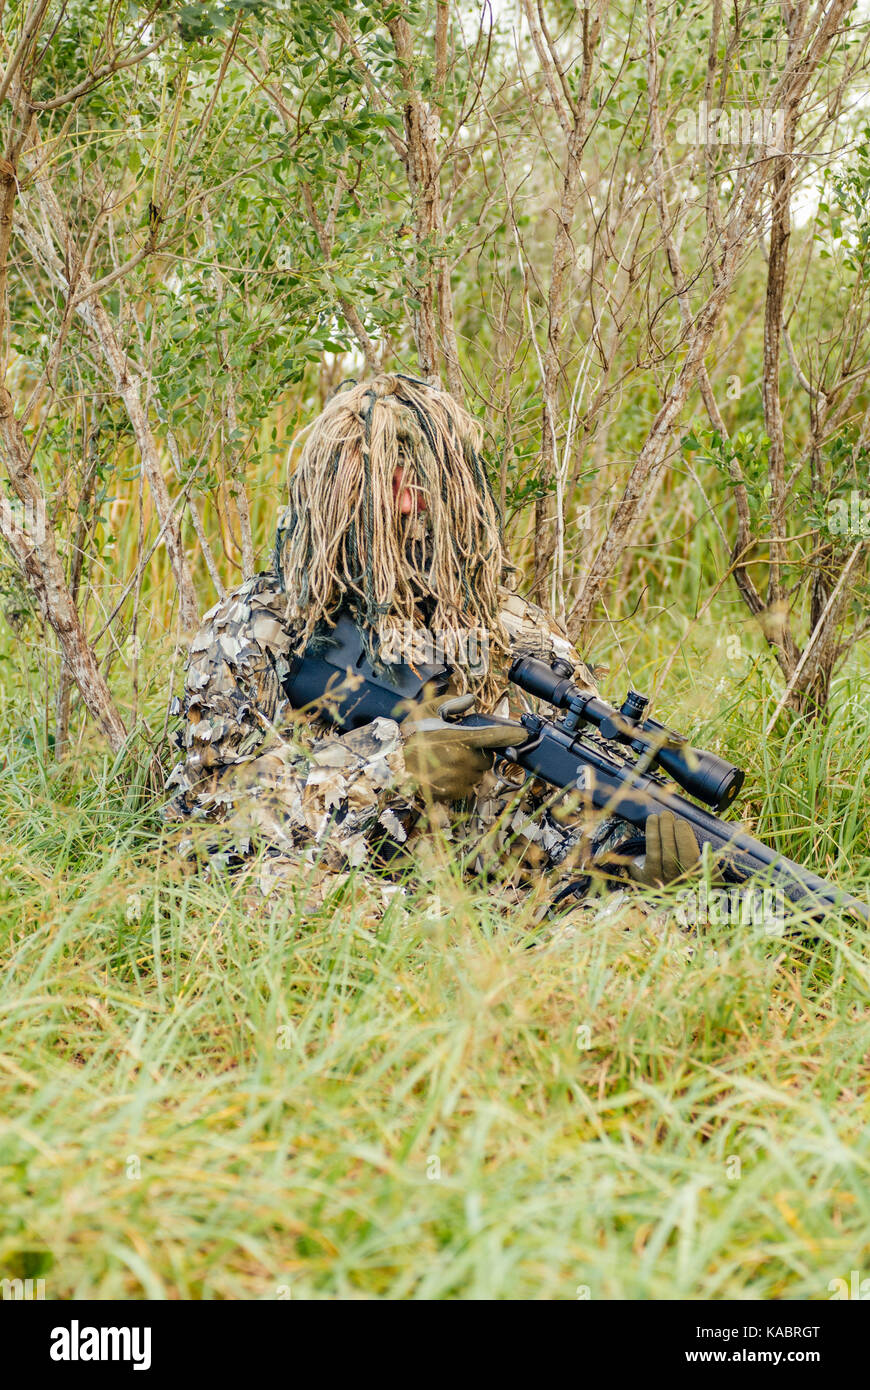 Law Enforcement Swat Sniper In A Ghillie Suit Crouched In